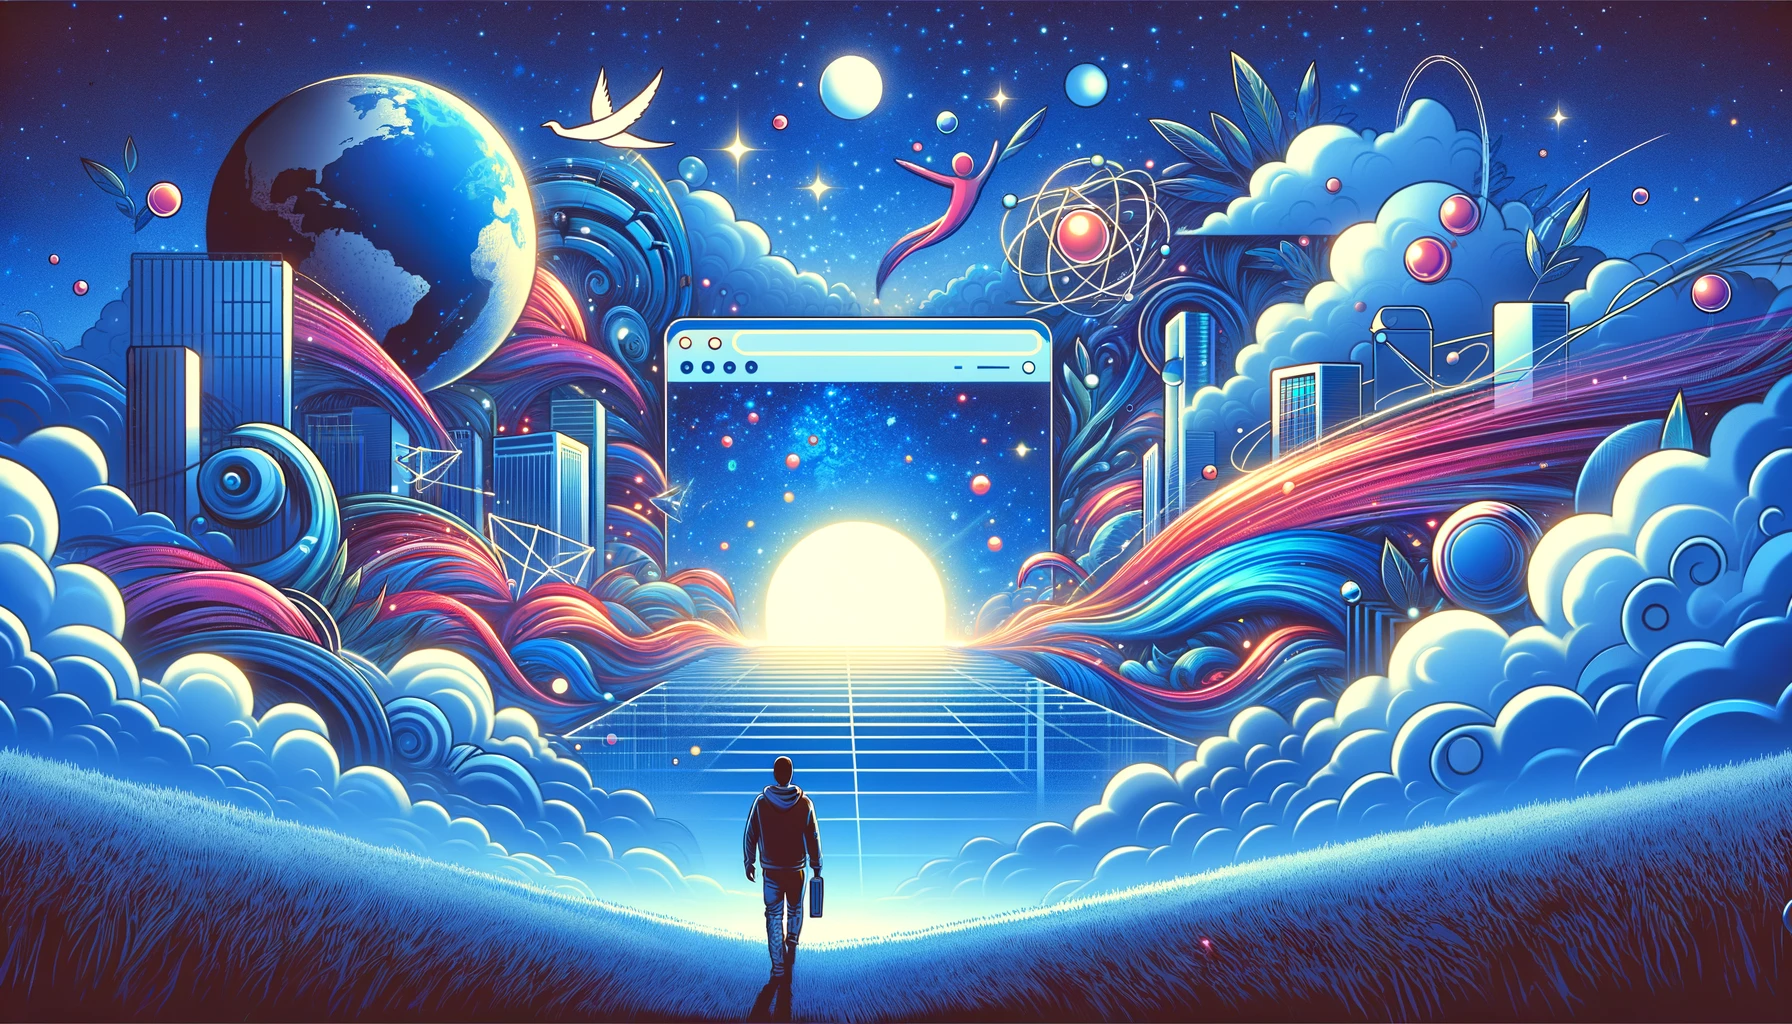 A person strides through a stylized cyber-punk landscape representing the digital universe within a website.